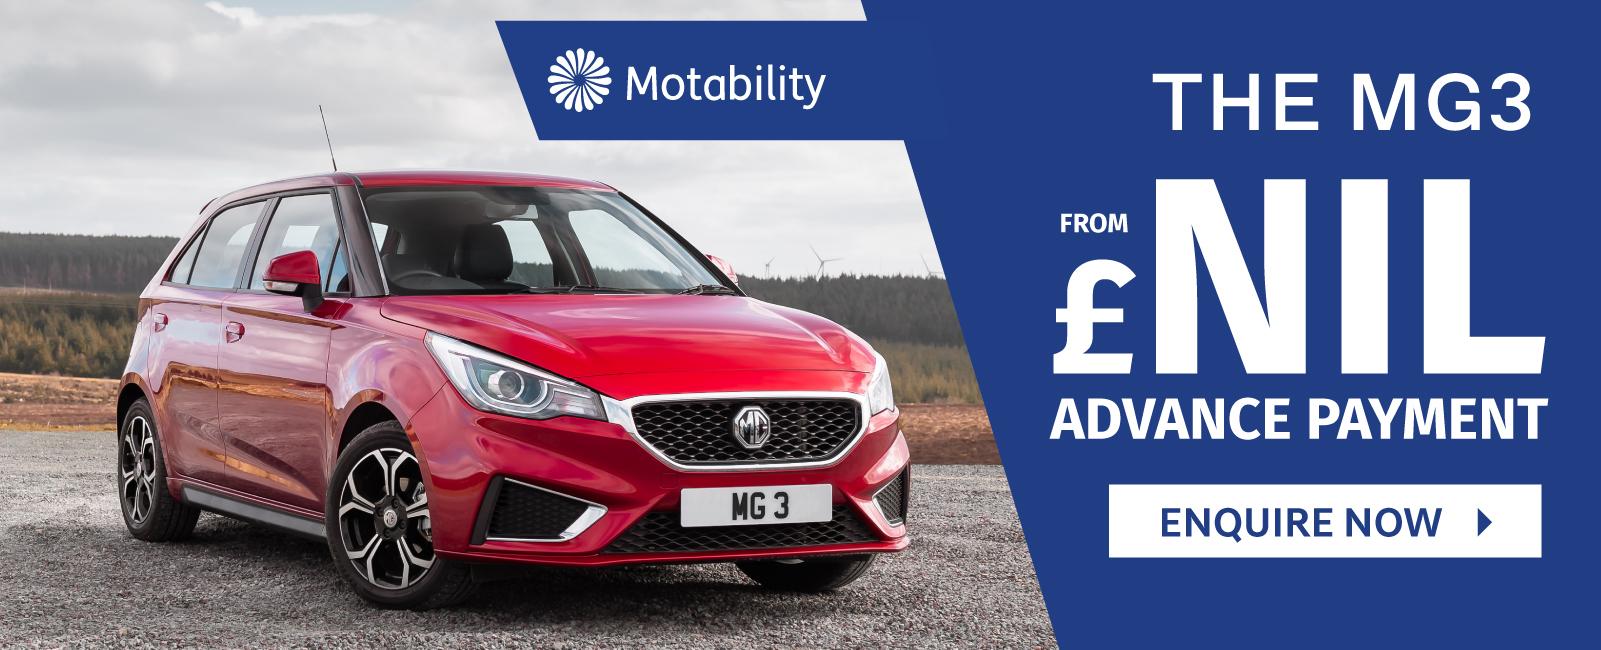 The MG3 on Motability Scheme from £NIL Advance Payment